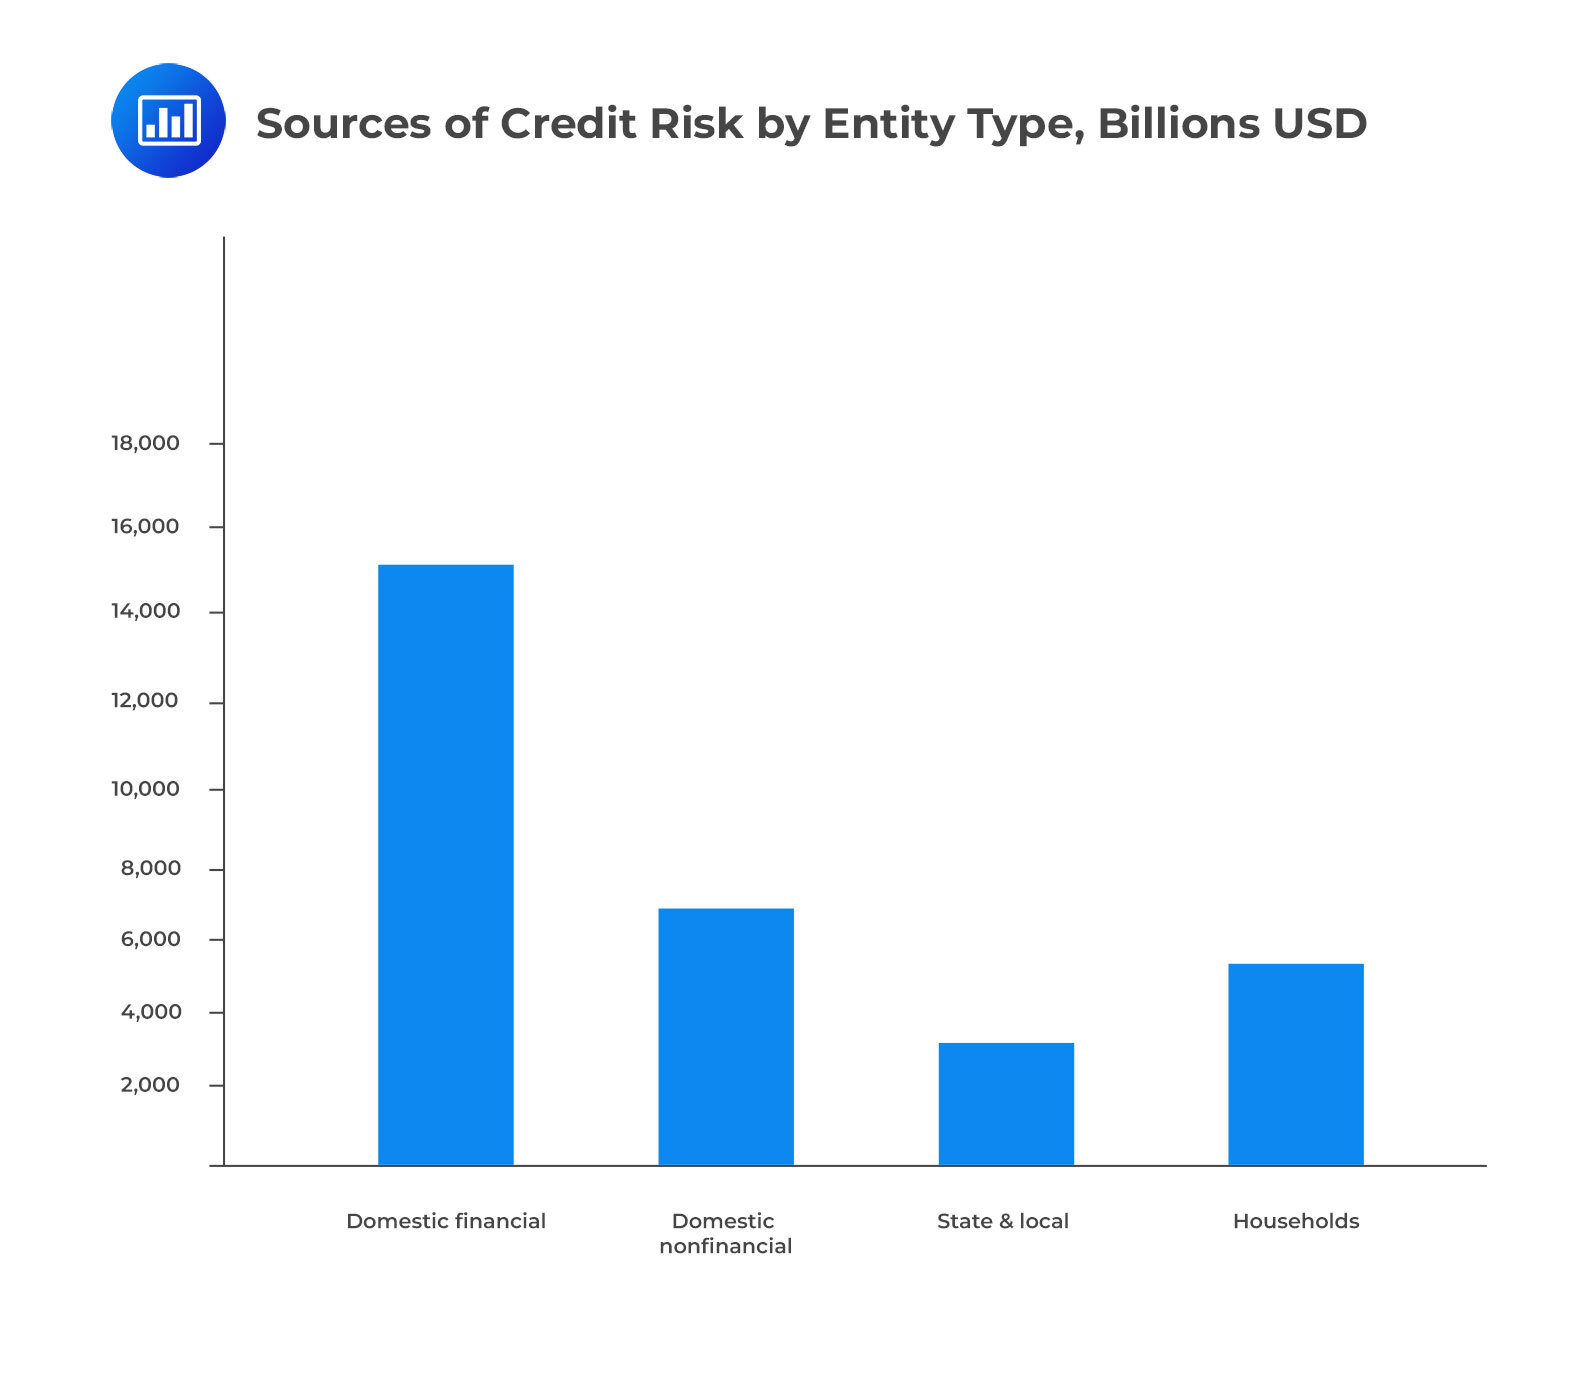 Sources of Credit Risk by Entity Type